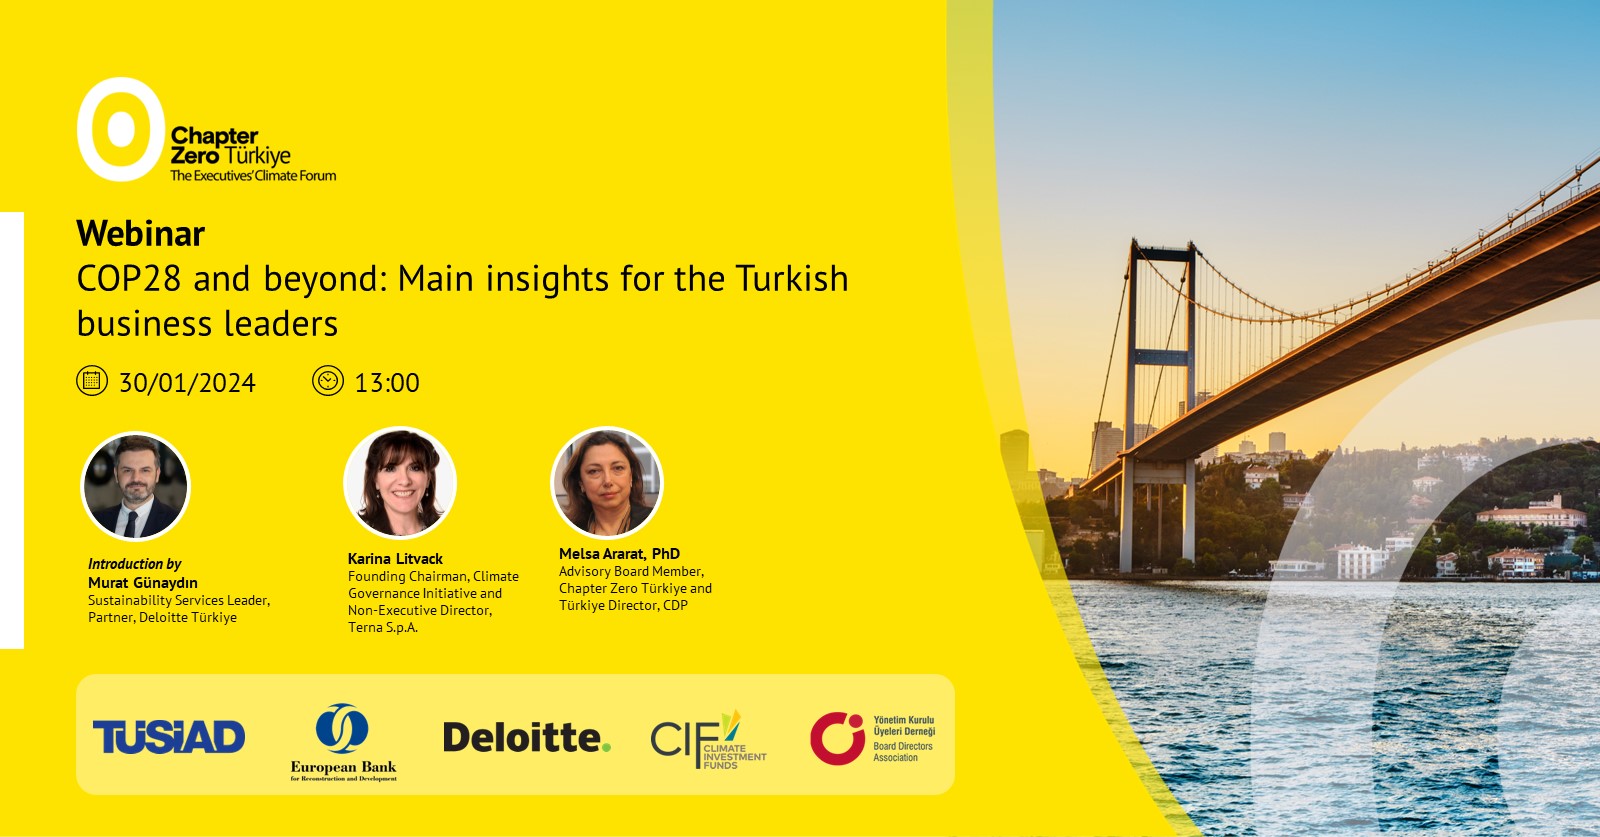 “ COP28 and beyond: Main insights for the Turkish business leaders ”